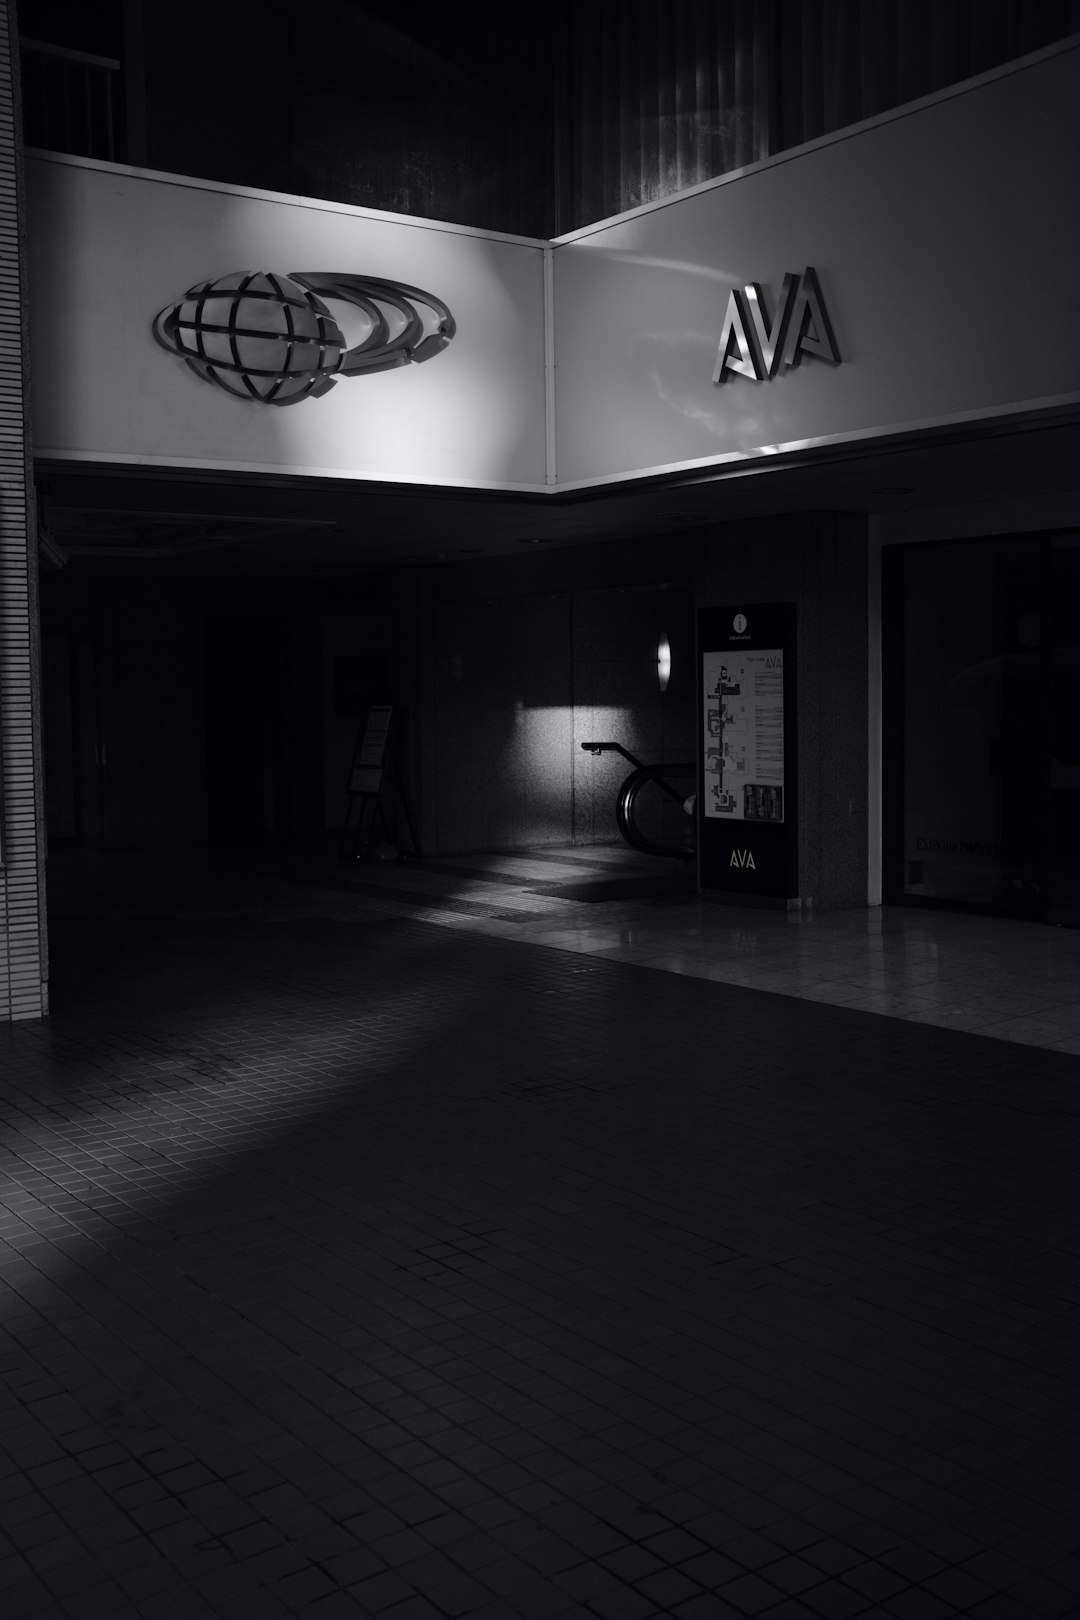 grayscale photography of AVA building front